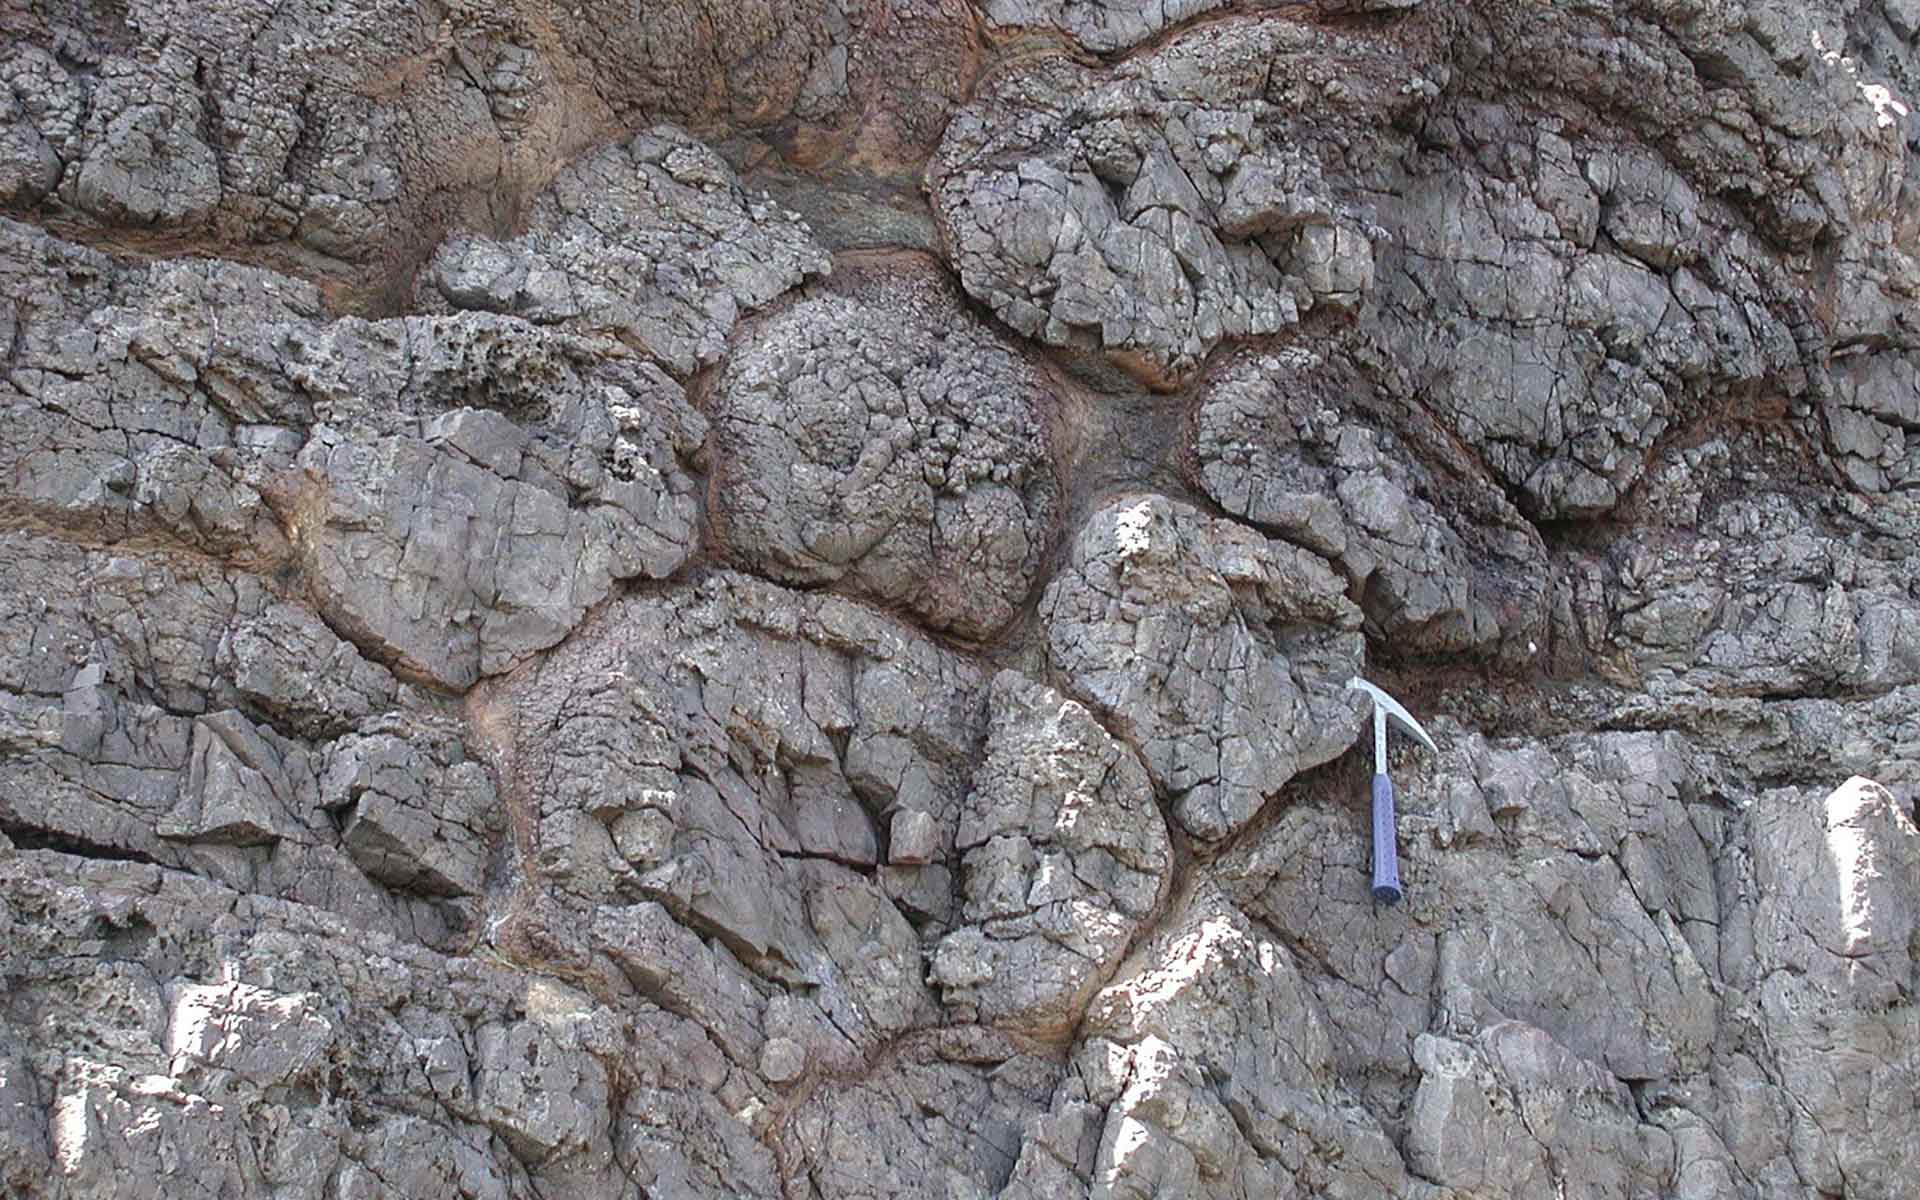 Outstanding outcrop of Late Jurassic pillow-lava flows